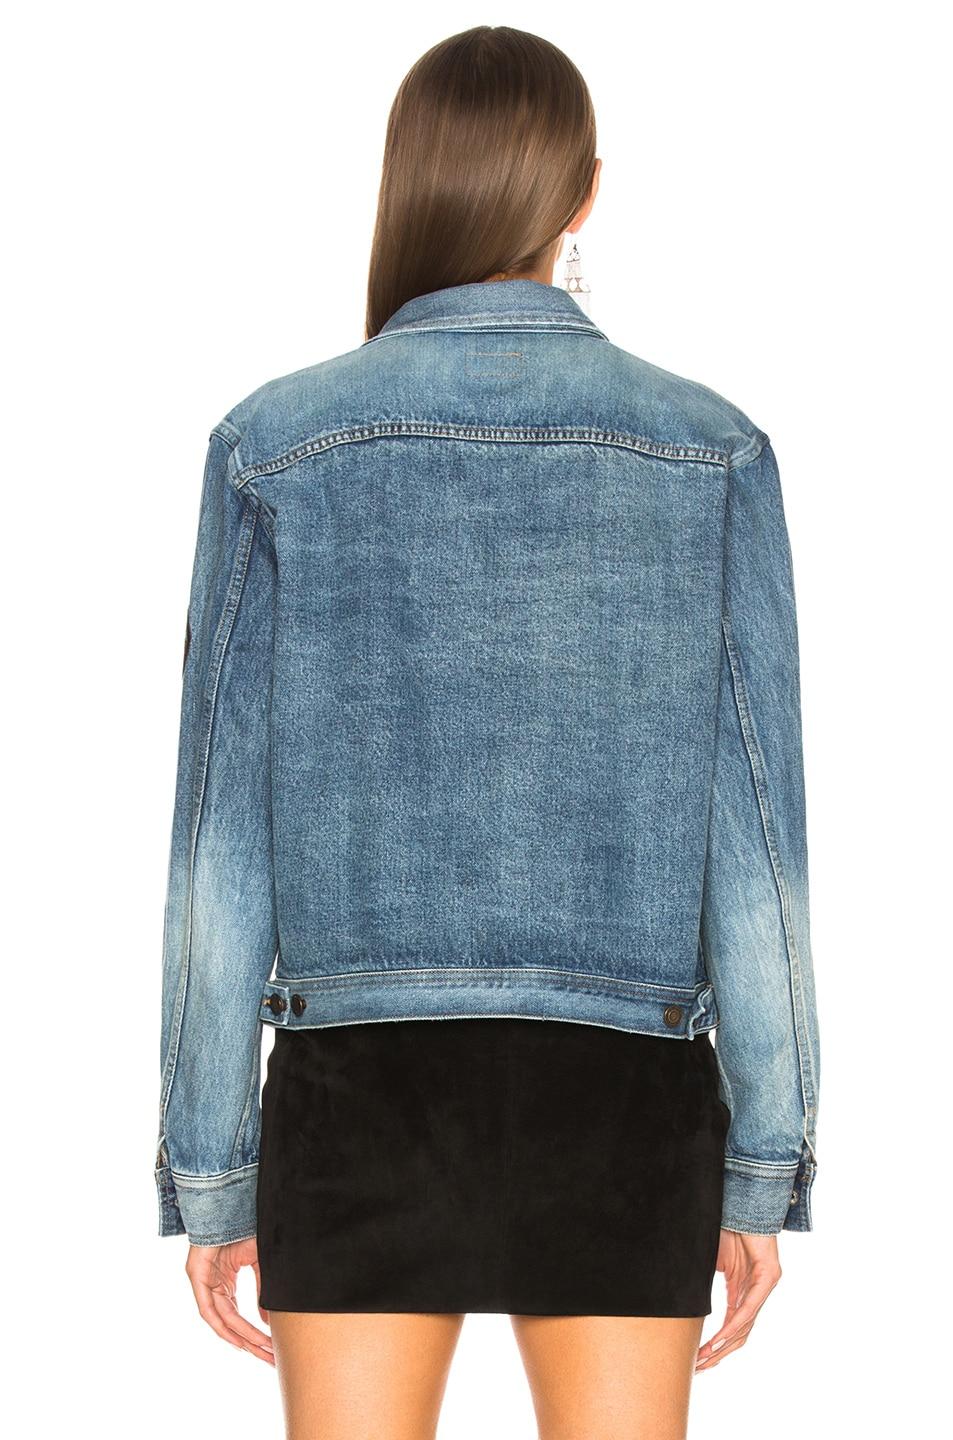 Gray Saint Laurent Blue Jean Denim Jacket with Embroidered Badge Size Large For Sale